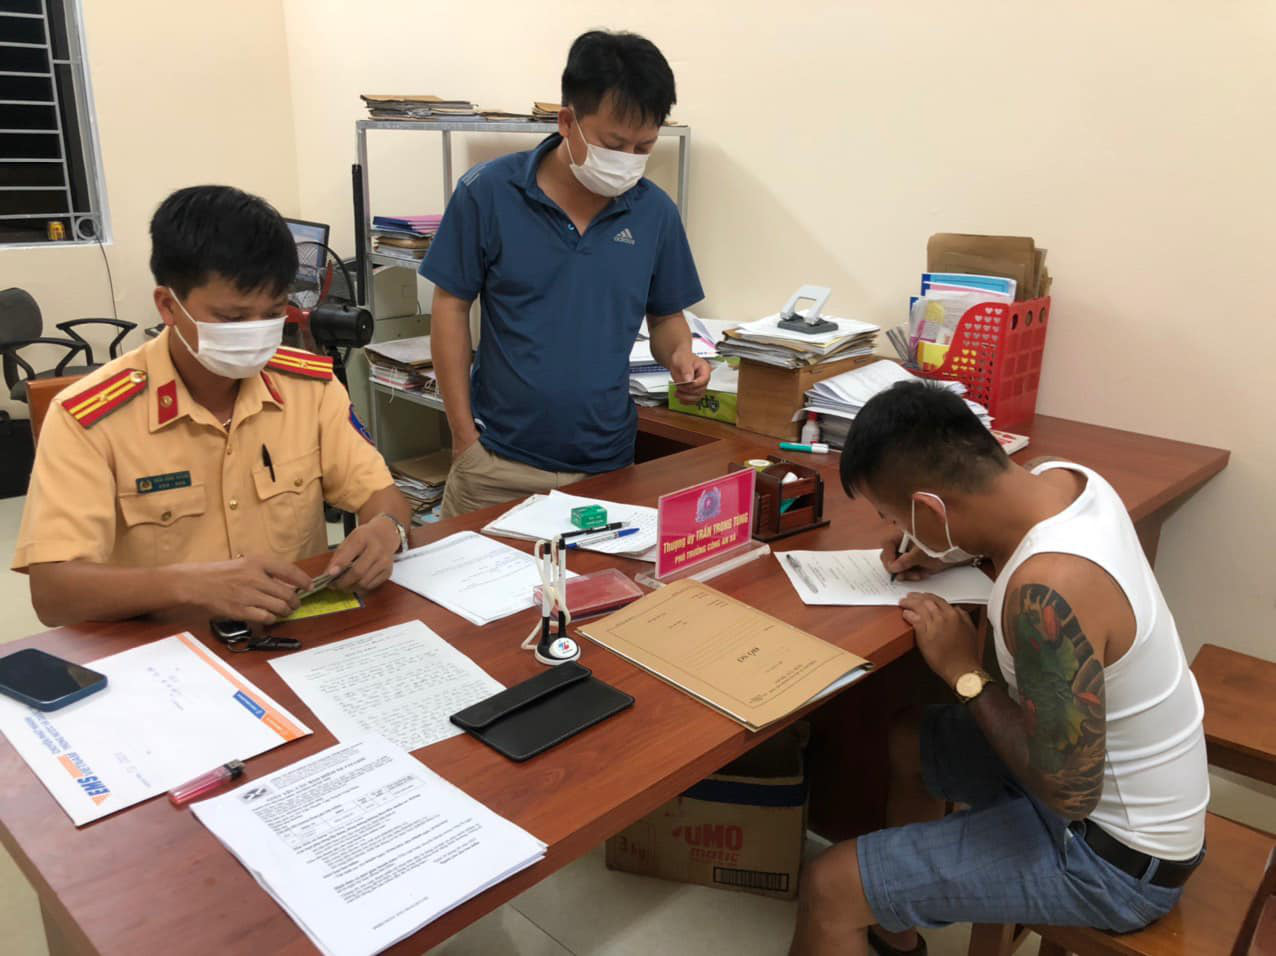 L.V.T. (right) fills out a police record after being found hiding in the trunk of a car in Son Duong District, Tuyen Quang Province, Vietnam, August 30, 2021. Photo: Tran Hong Quang / Tuoi Tre